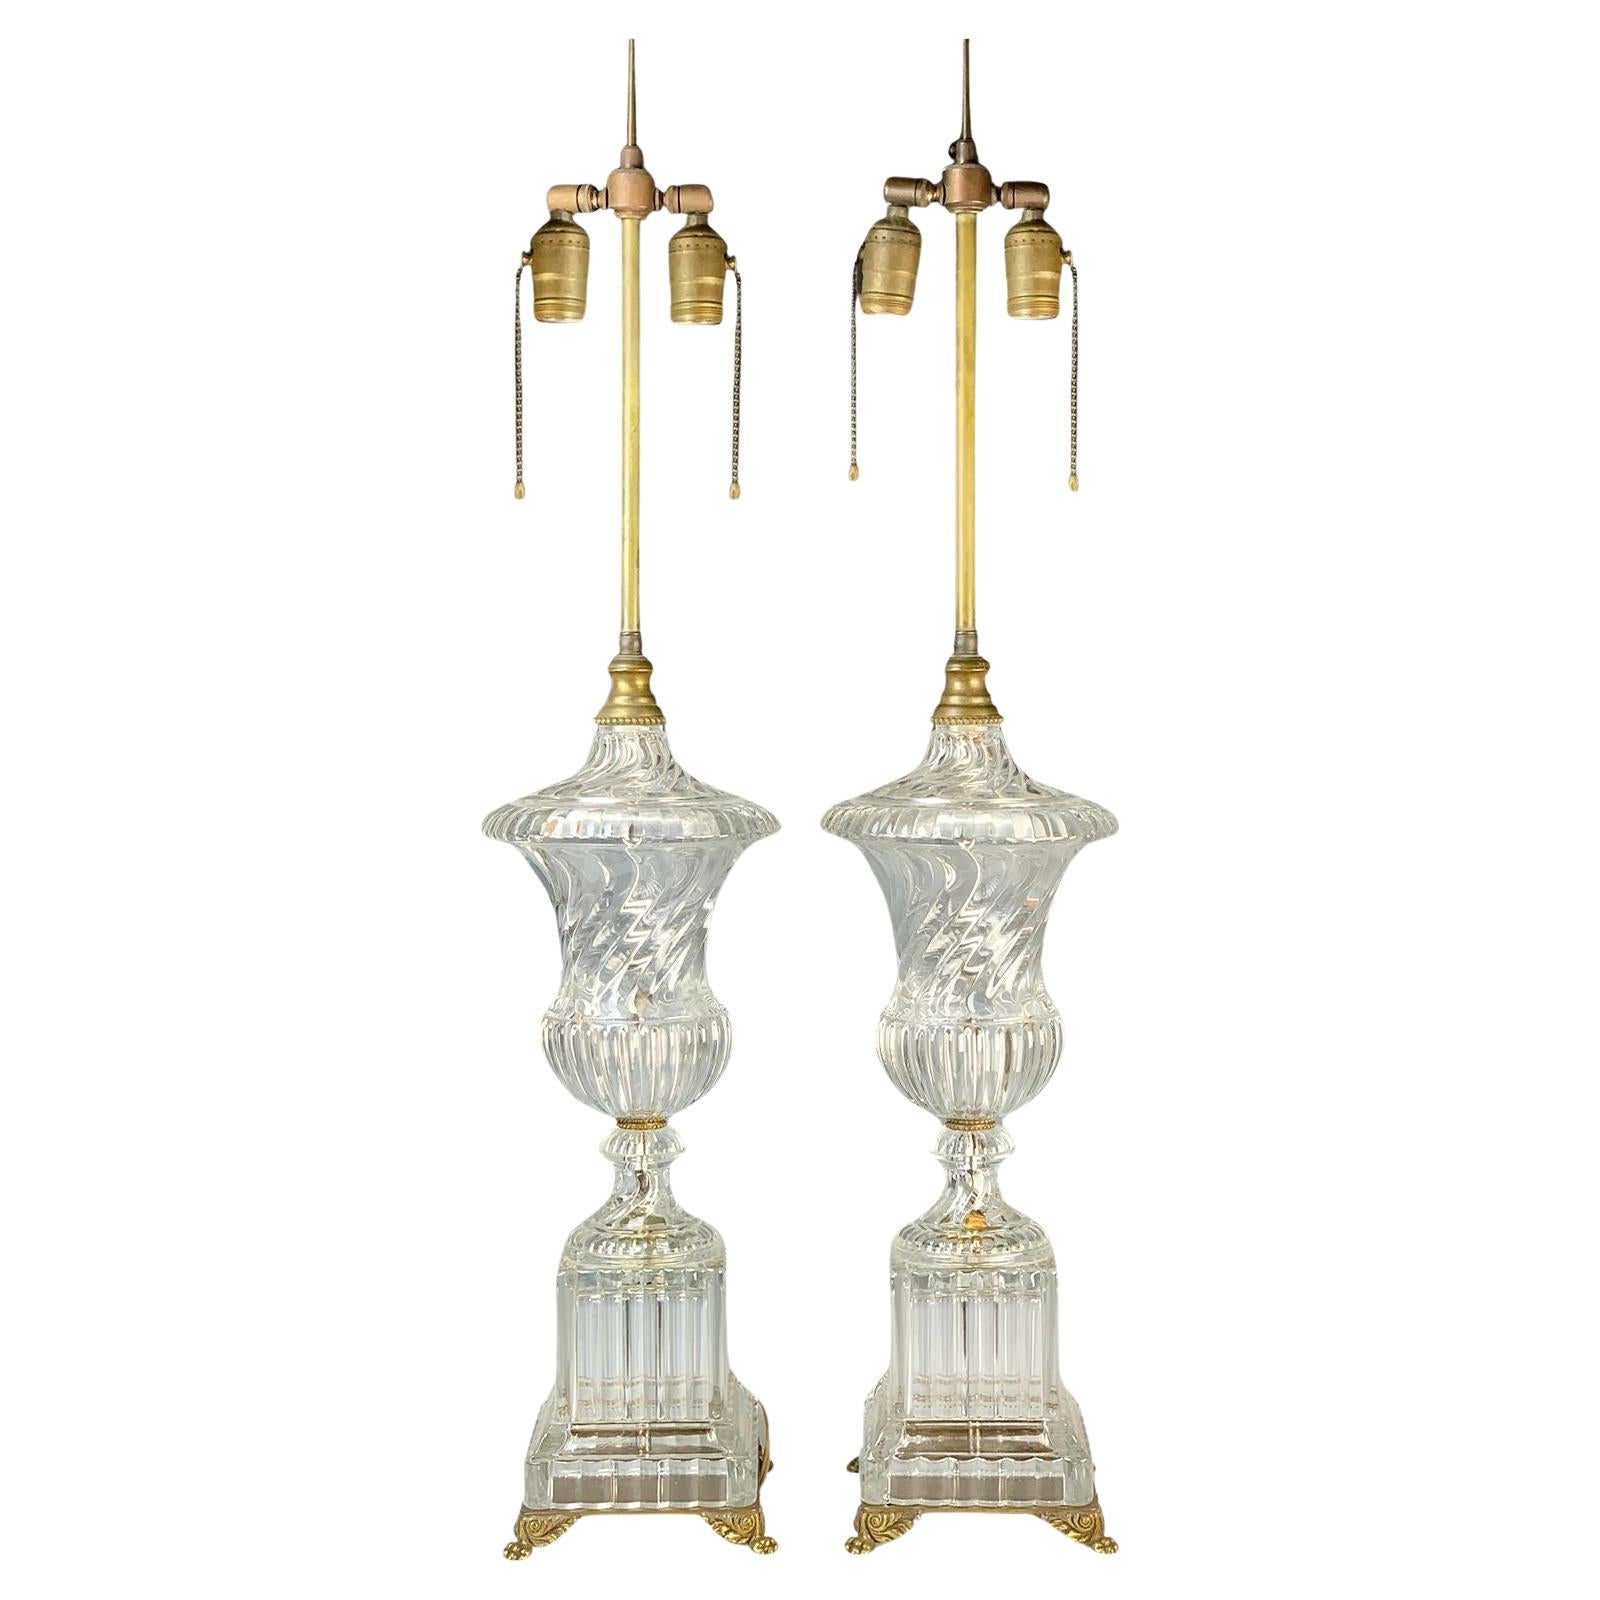 Pair of Baccarat Swirl Crystal Table Lamps w/ Bronze Accents, c. 1920's